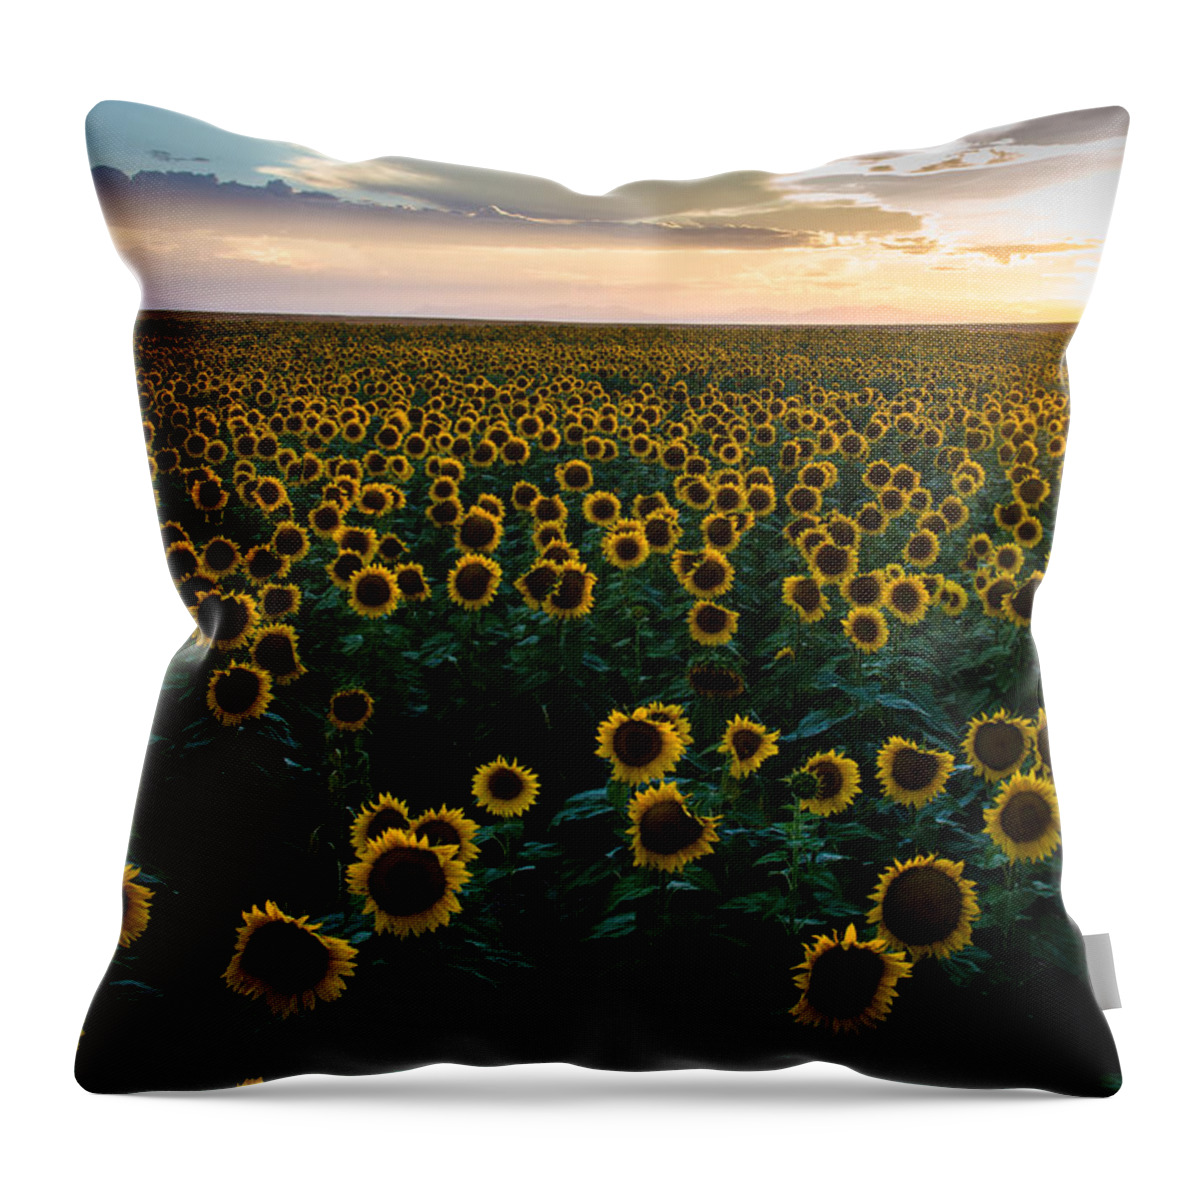 Sunflowers Throw Pillow featuring the photograph Sunflowers at Sunset by Stephen Holst